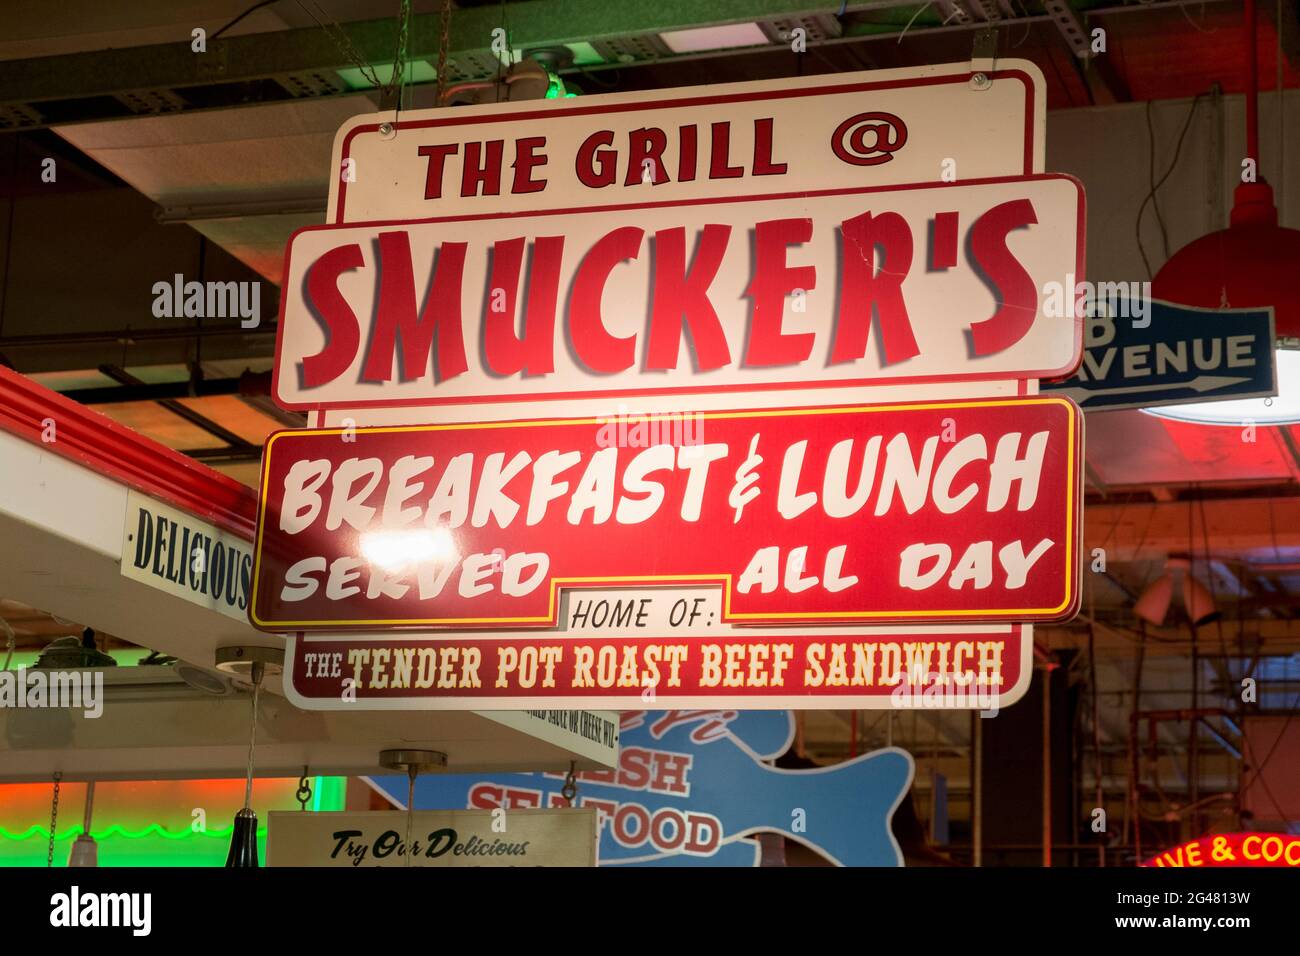 The sign for the famous Smucker's grill, serving tender pot roast beef sandwiches. At the Reading Terminal Market in Philadelphia, Pennysylvania. Stock Photo